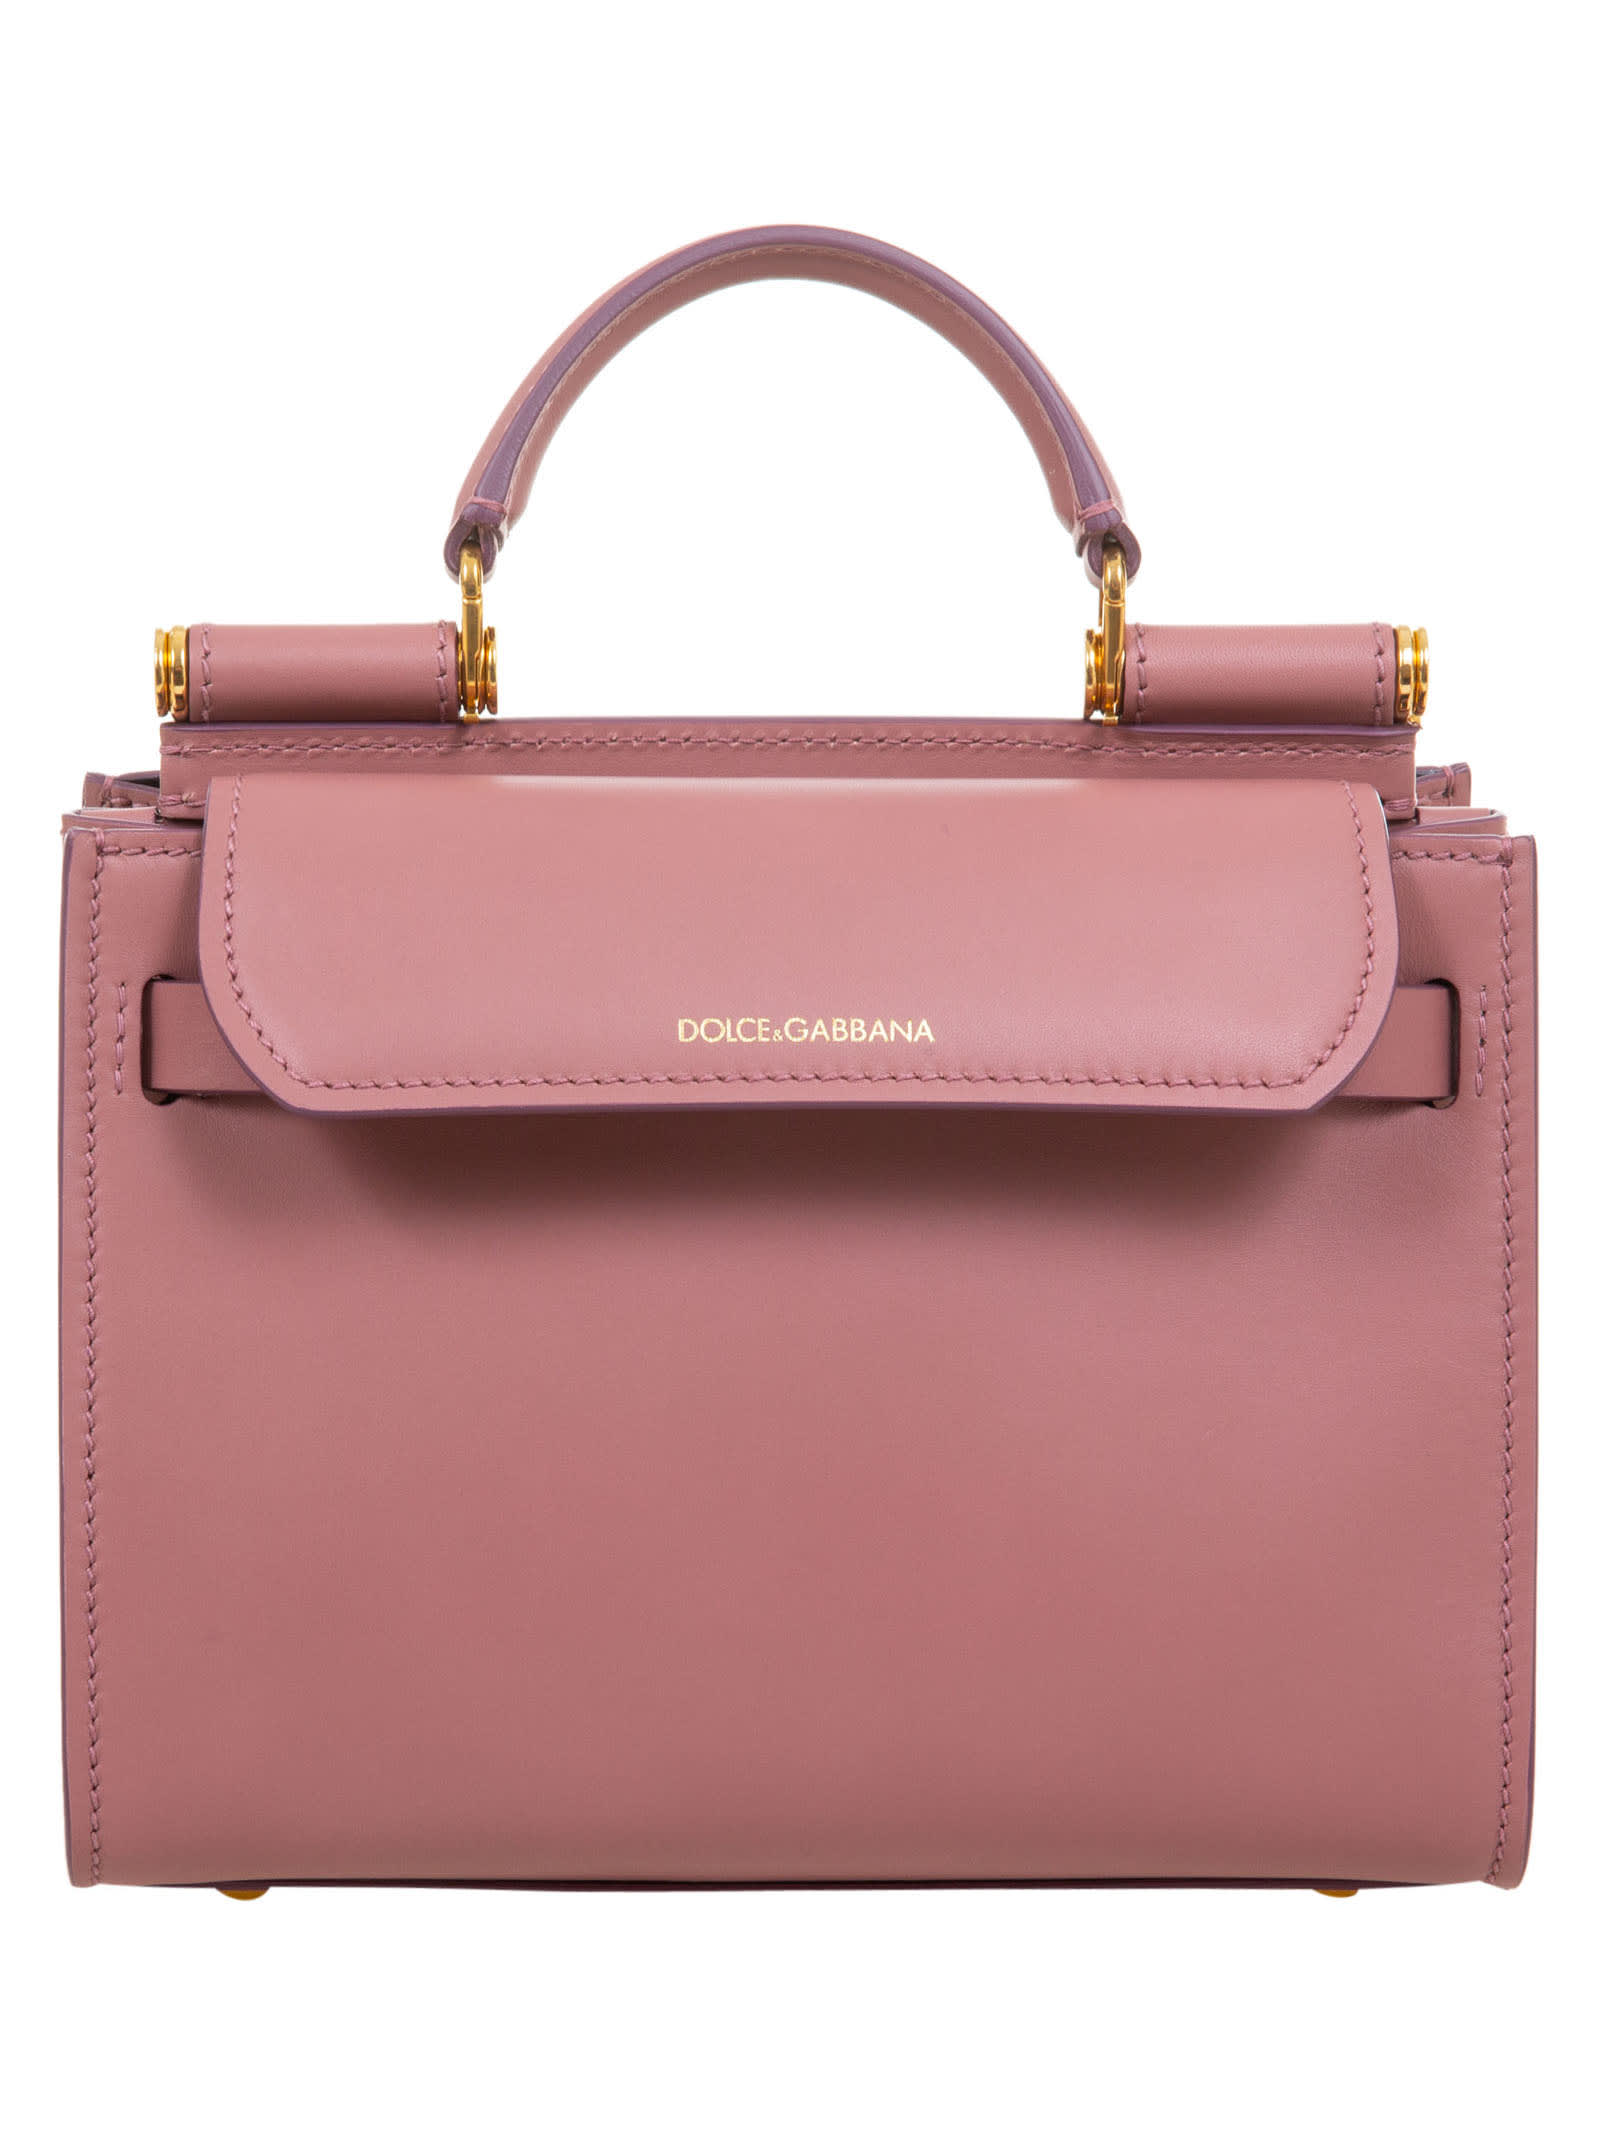 Dolce & Gabbana Logo Plaque Tote In Pink